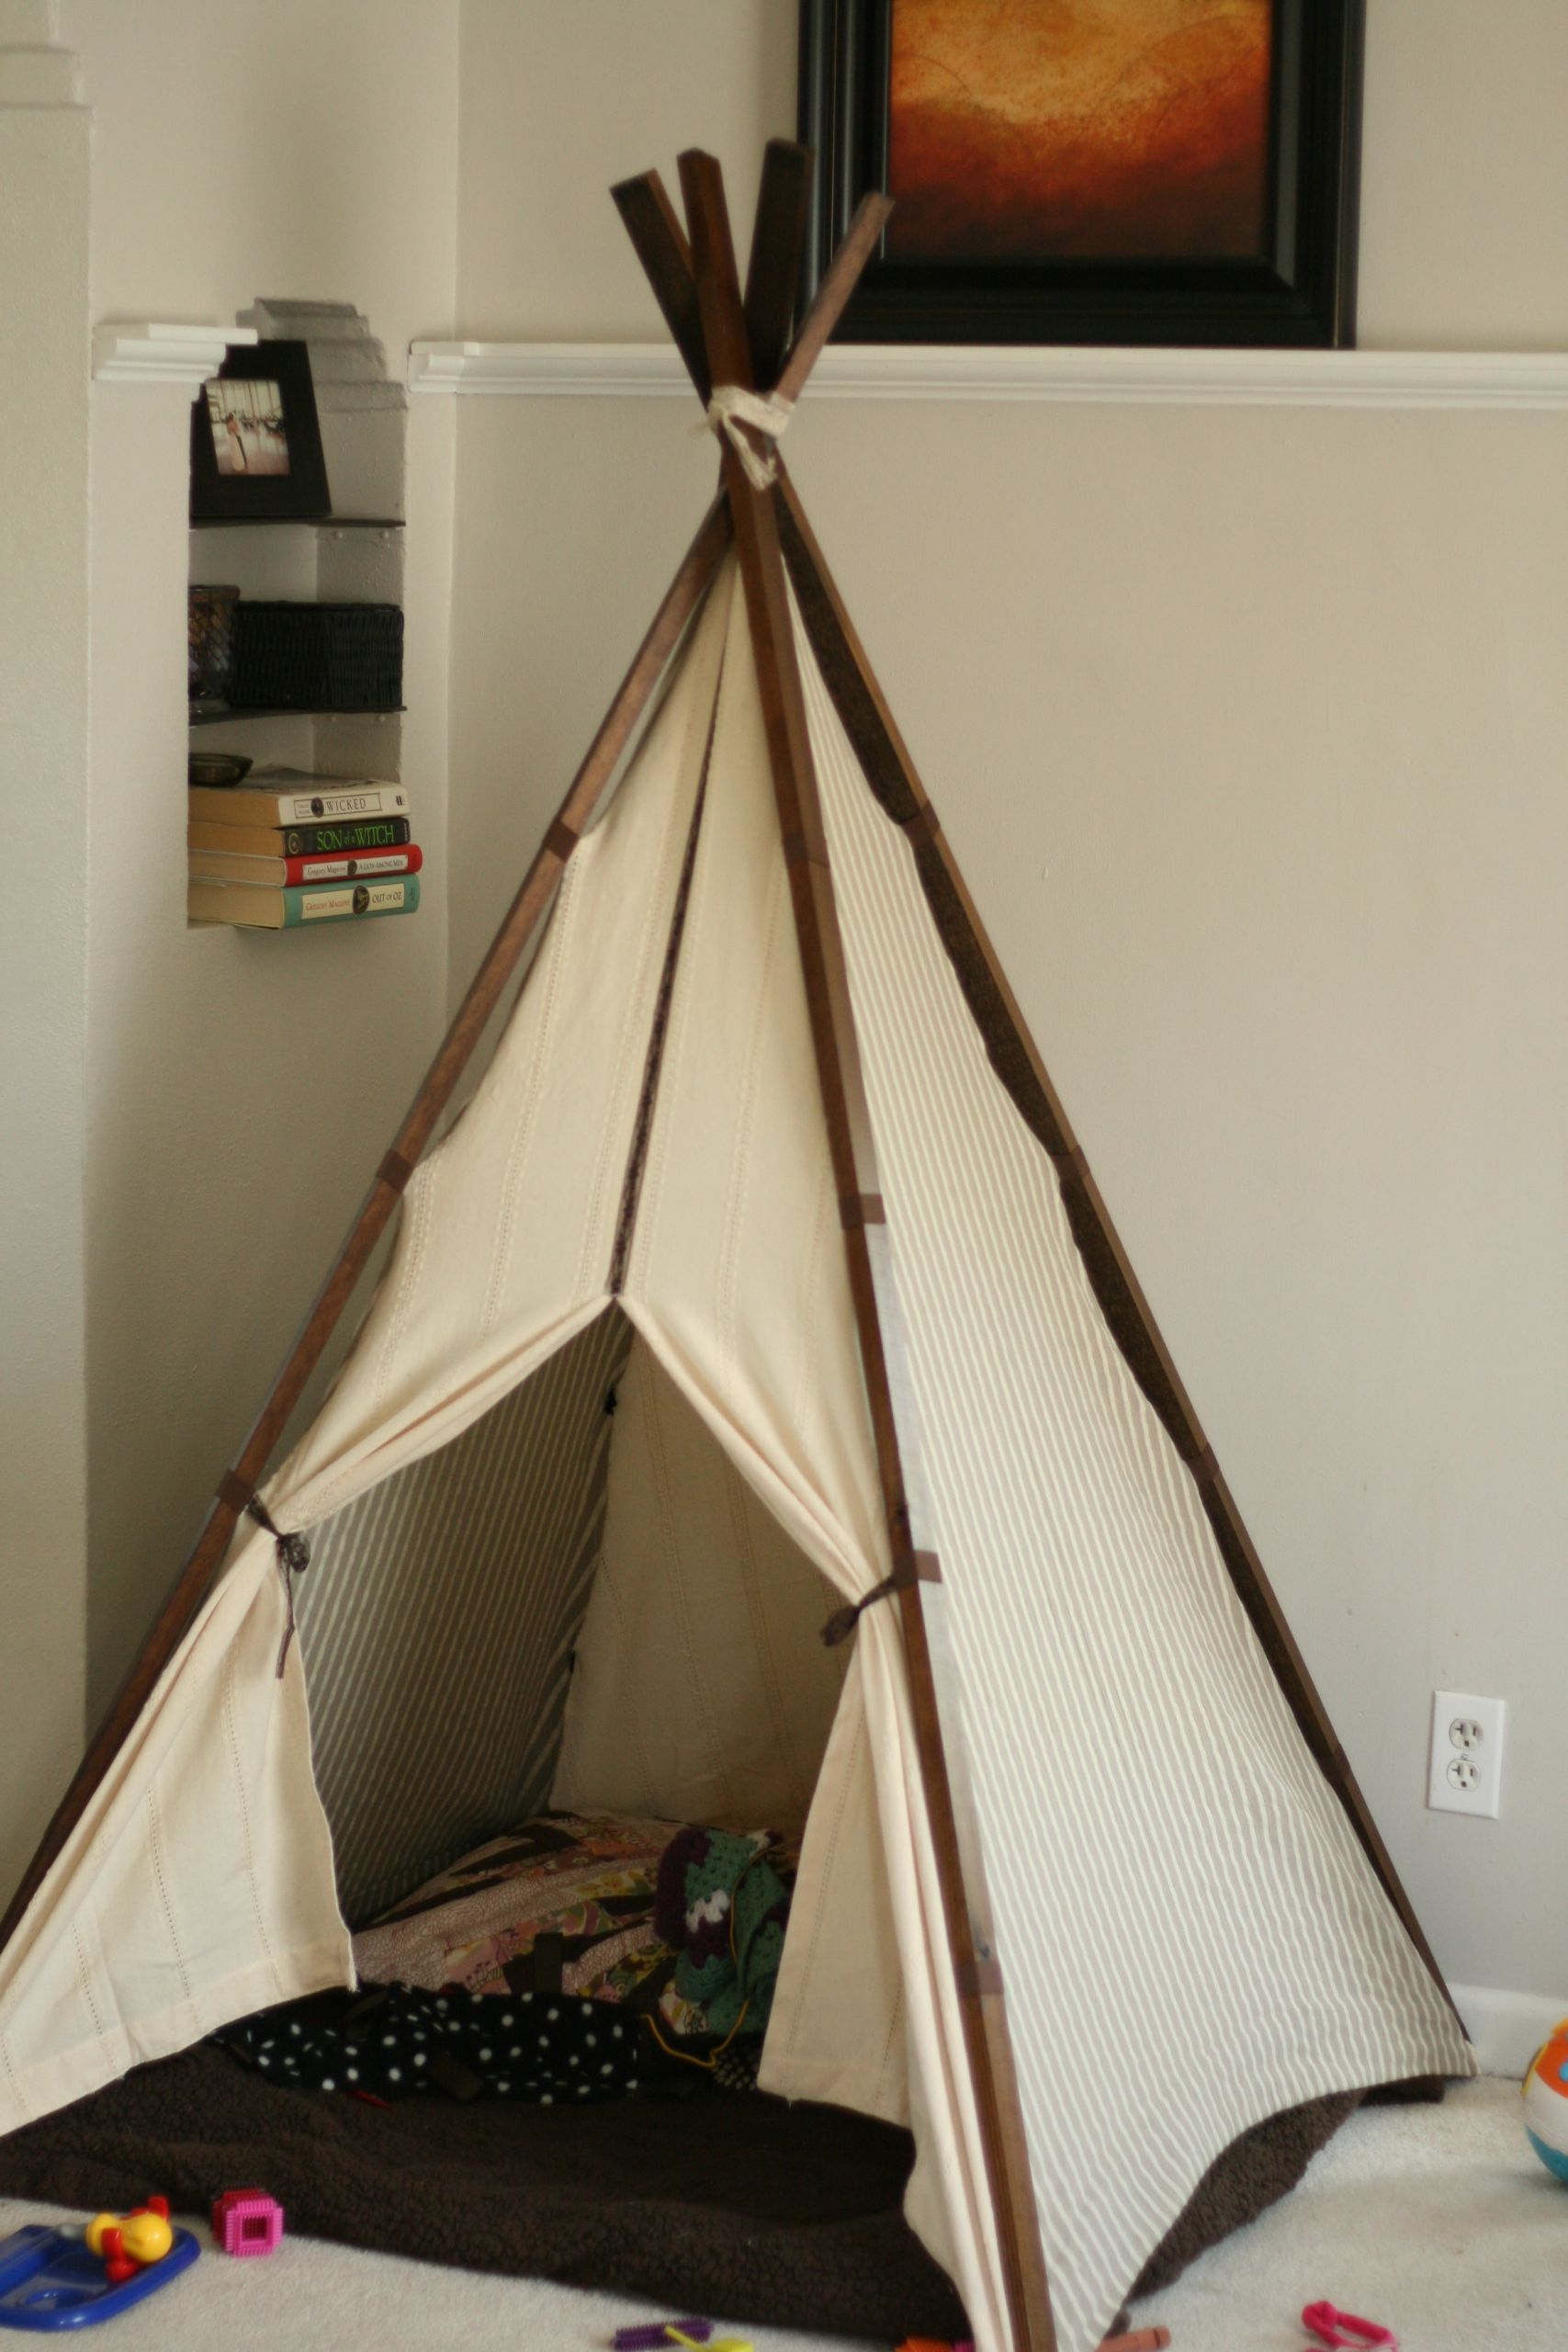 DIY Teepee For Toddler
 DIY Child’s Teepee AKA beautifying the mess in the living